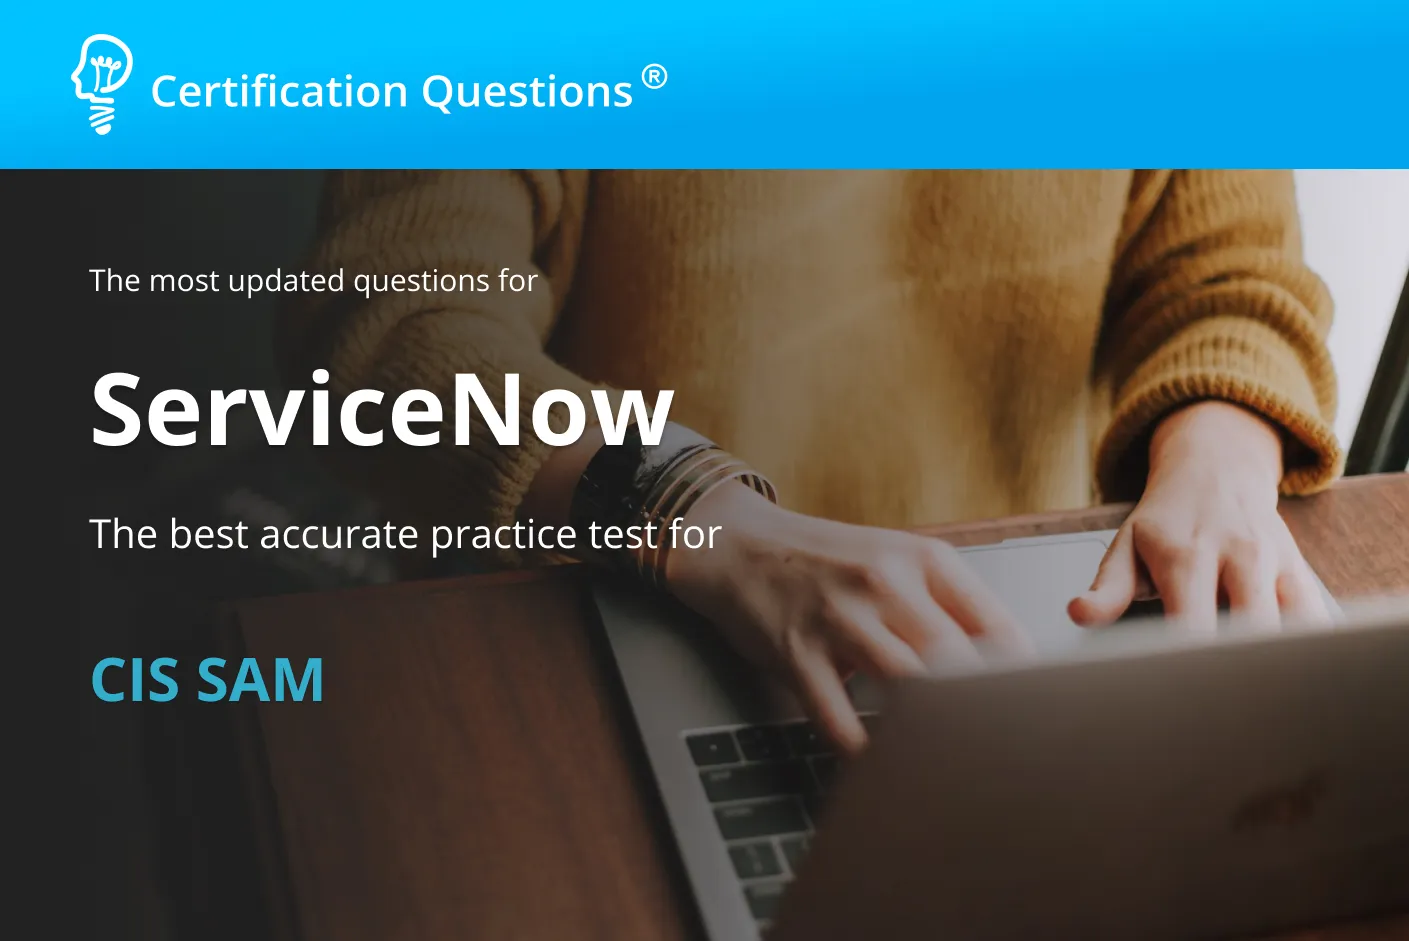 Here we will discuss the ServiceNow Software Asset Management exam questions and related topics